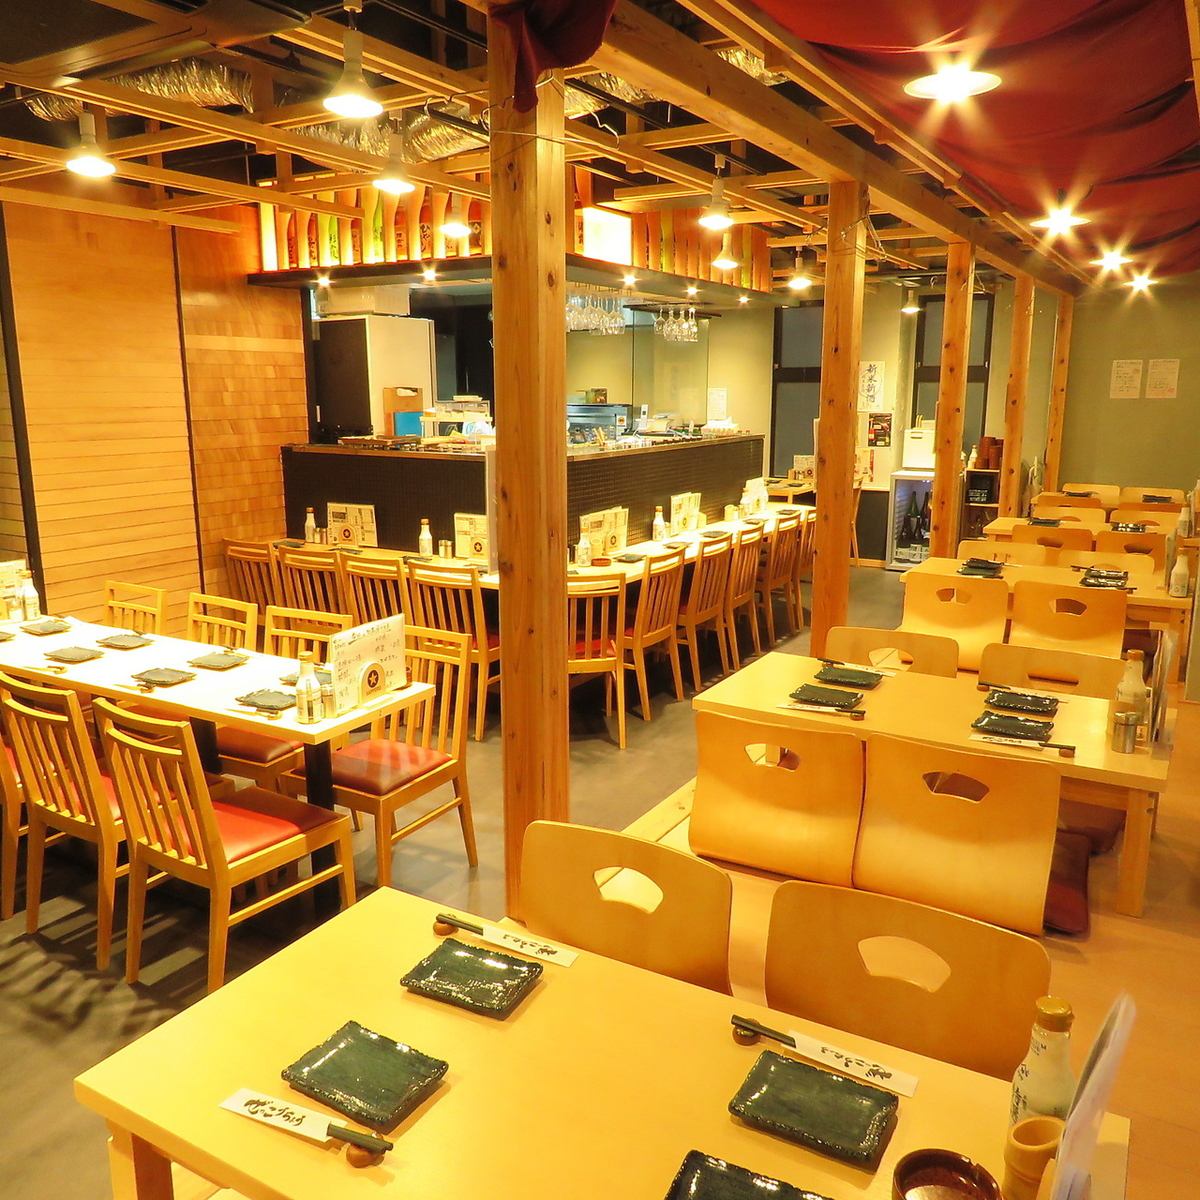 2 minutes walk from the station! Clean interior♪ Perfect for a date or a casual meal!